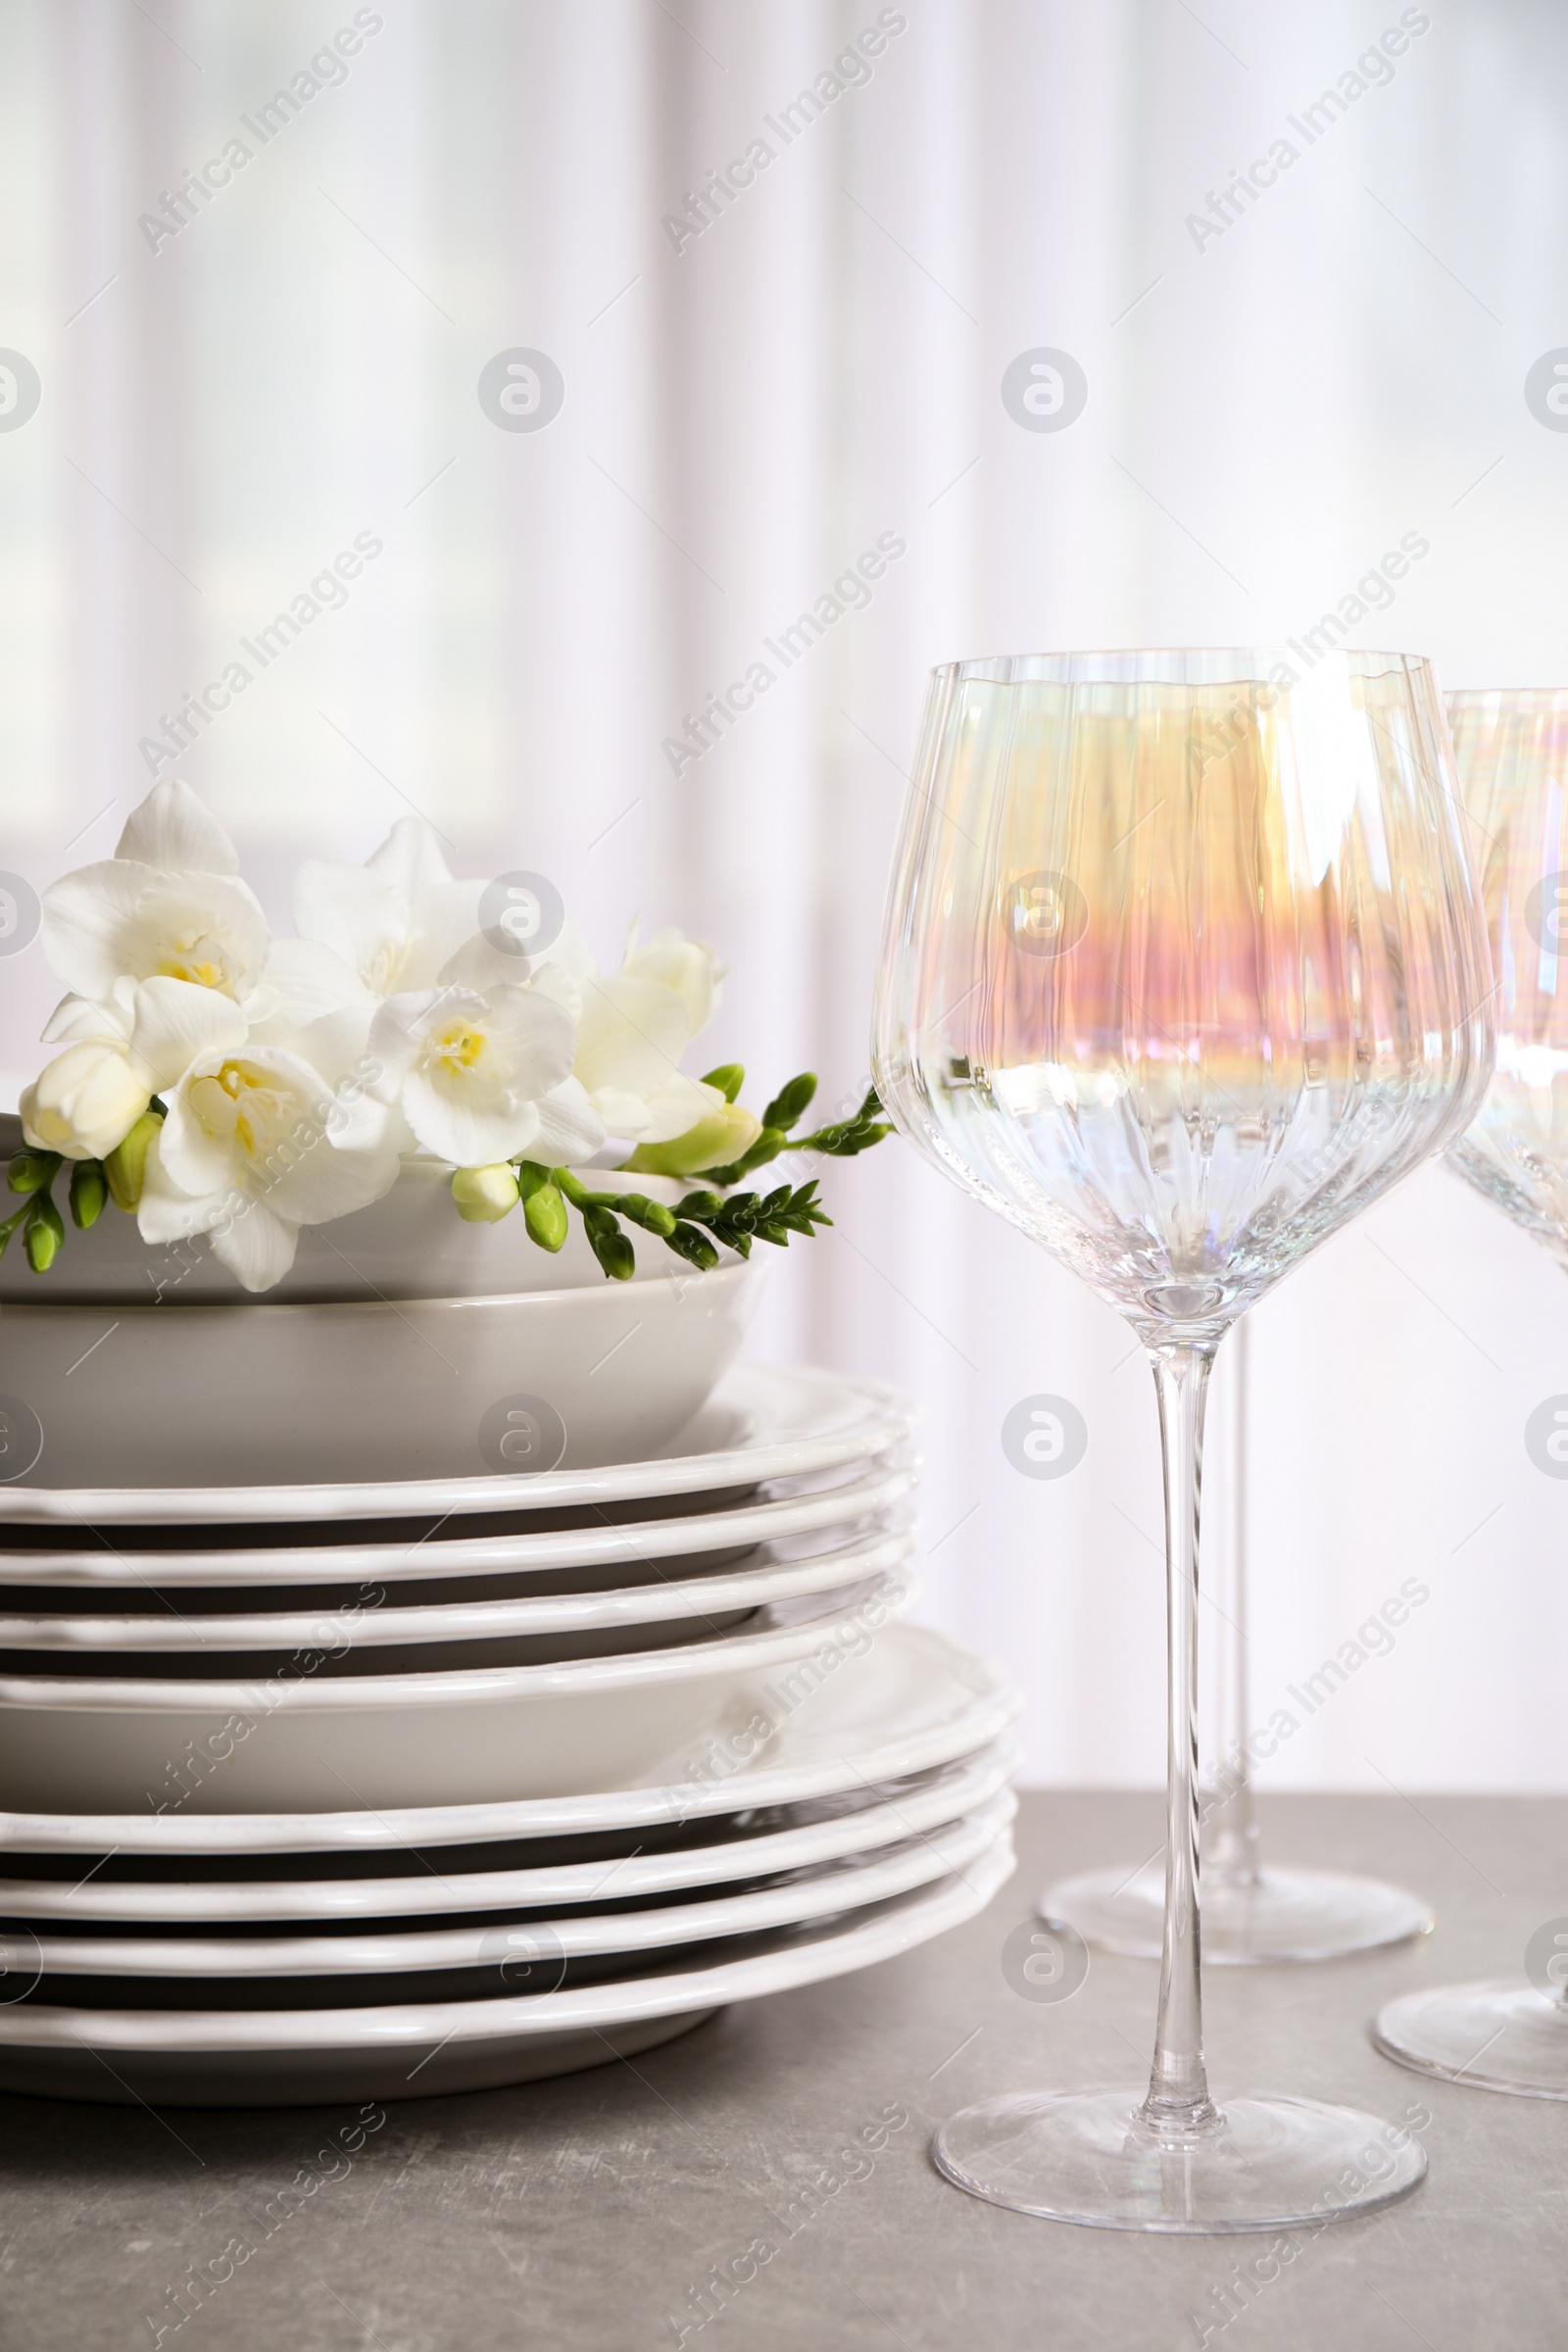 Photo of Set of glasses and dishes with flowers on light grey table